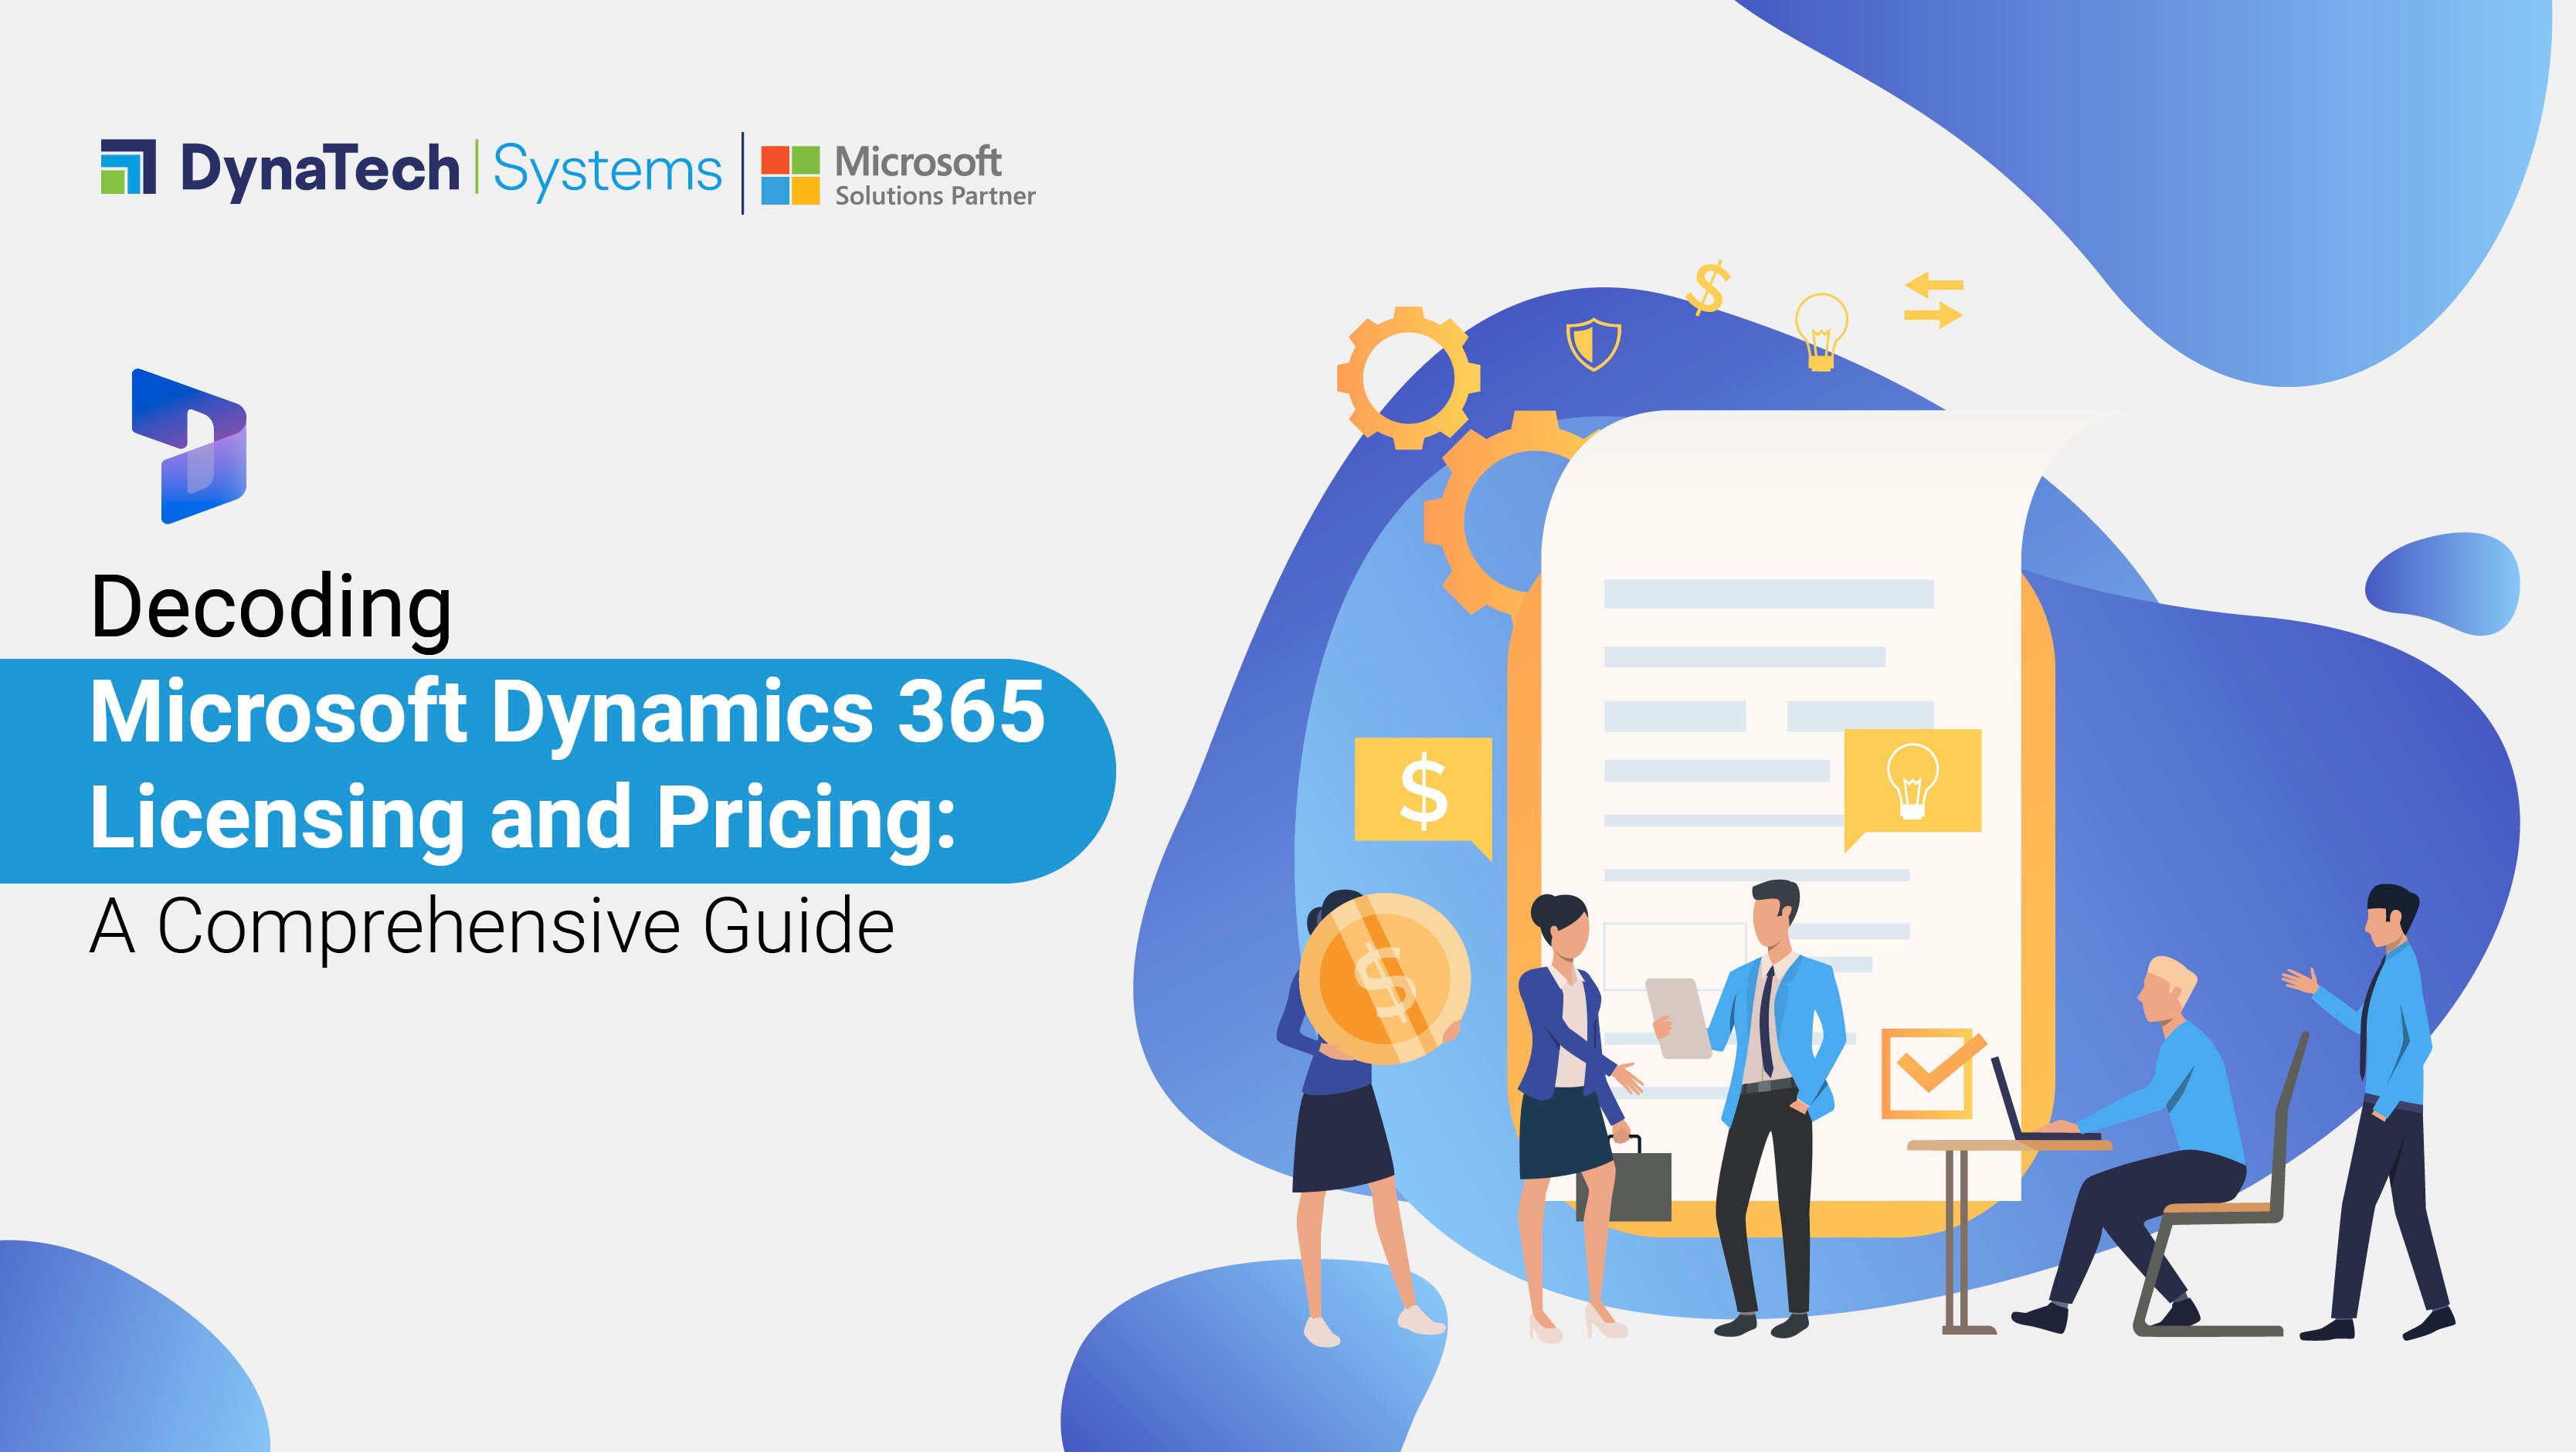 Decoding Microsoft Dynamics 365 Licensing and Pricing: A Comprehensive Guide